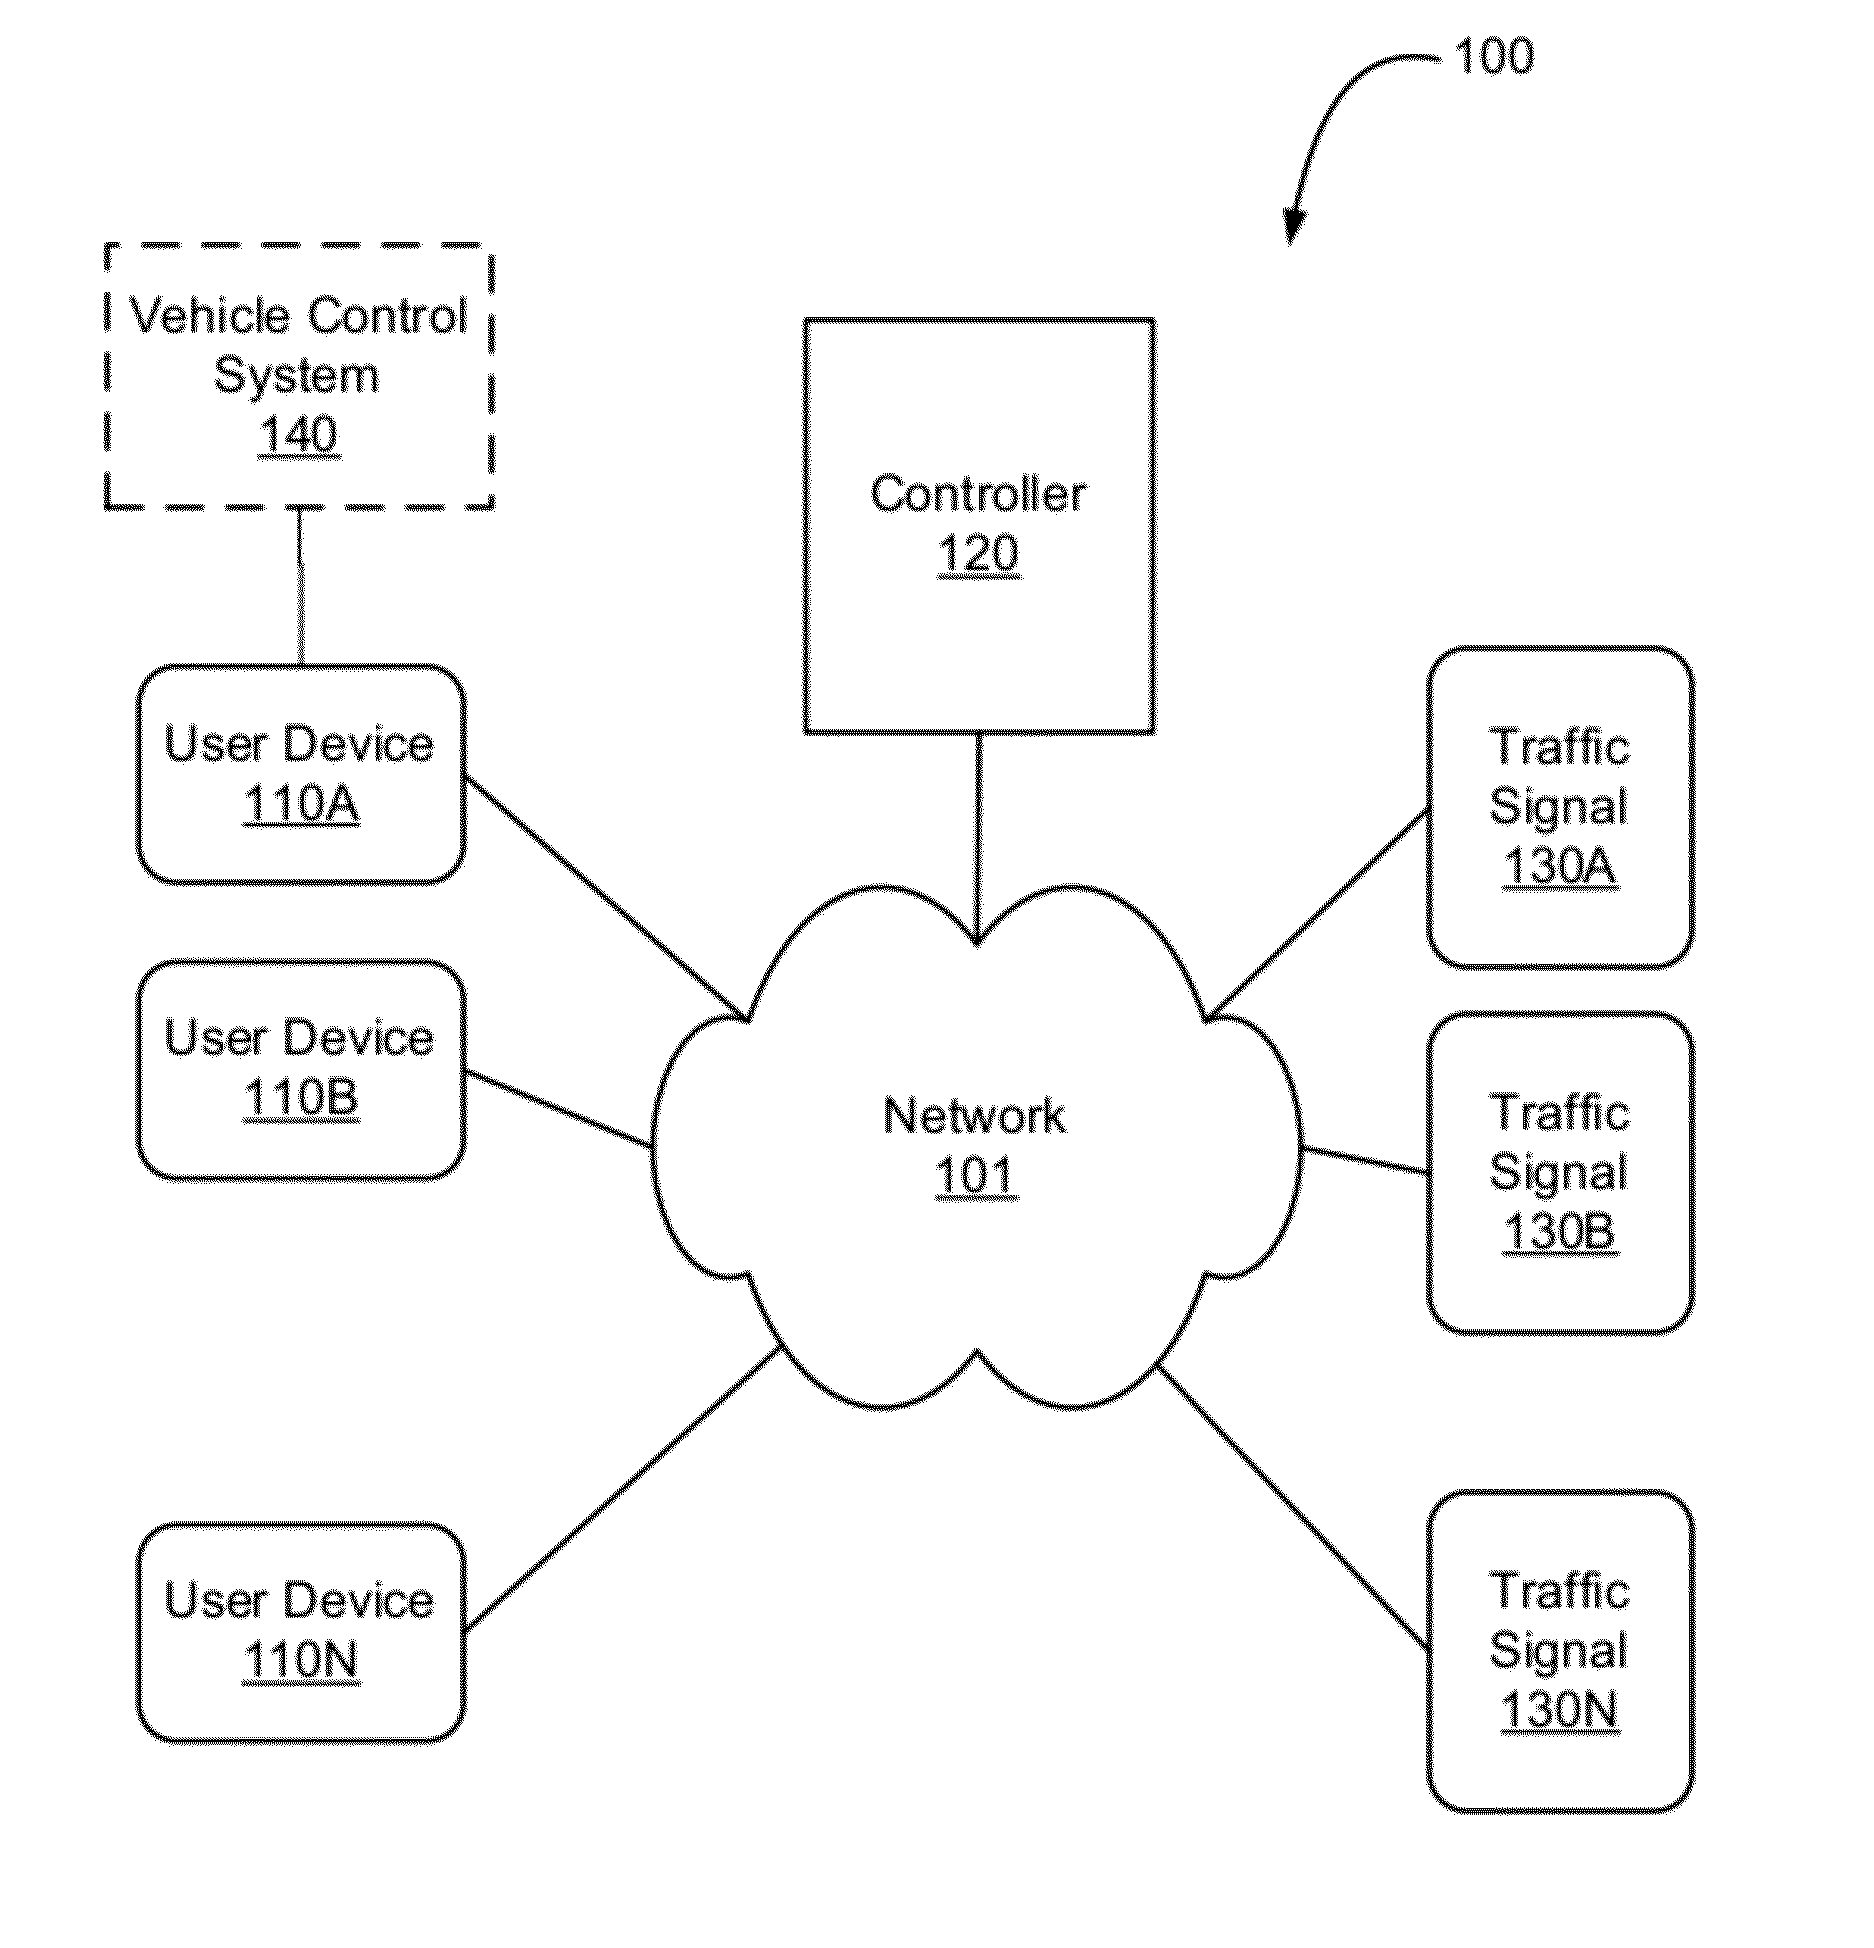 Driver Safety Enhancement Using Intelligent Traffic Signals and GPS